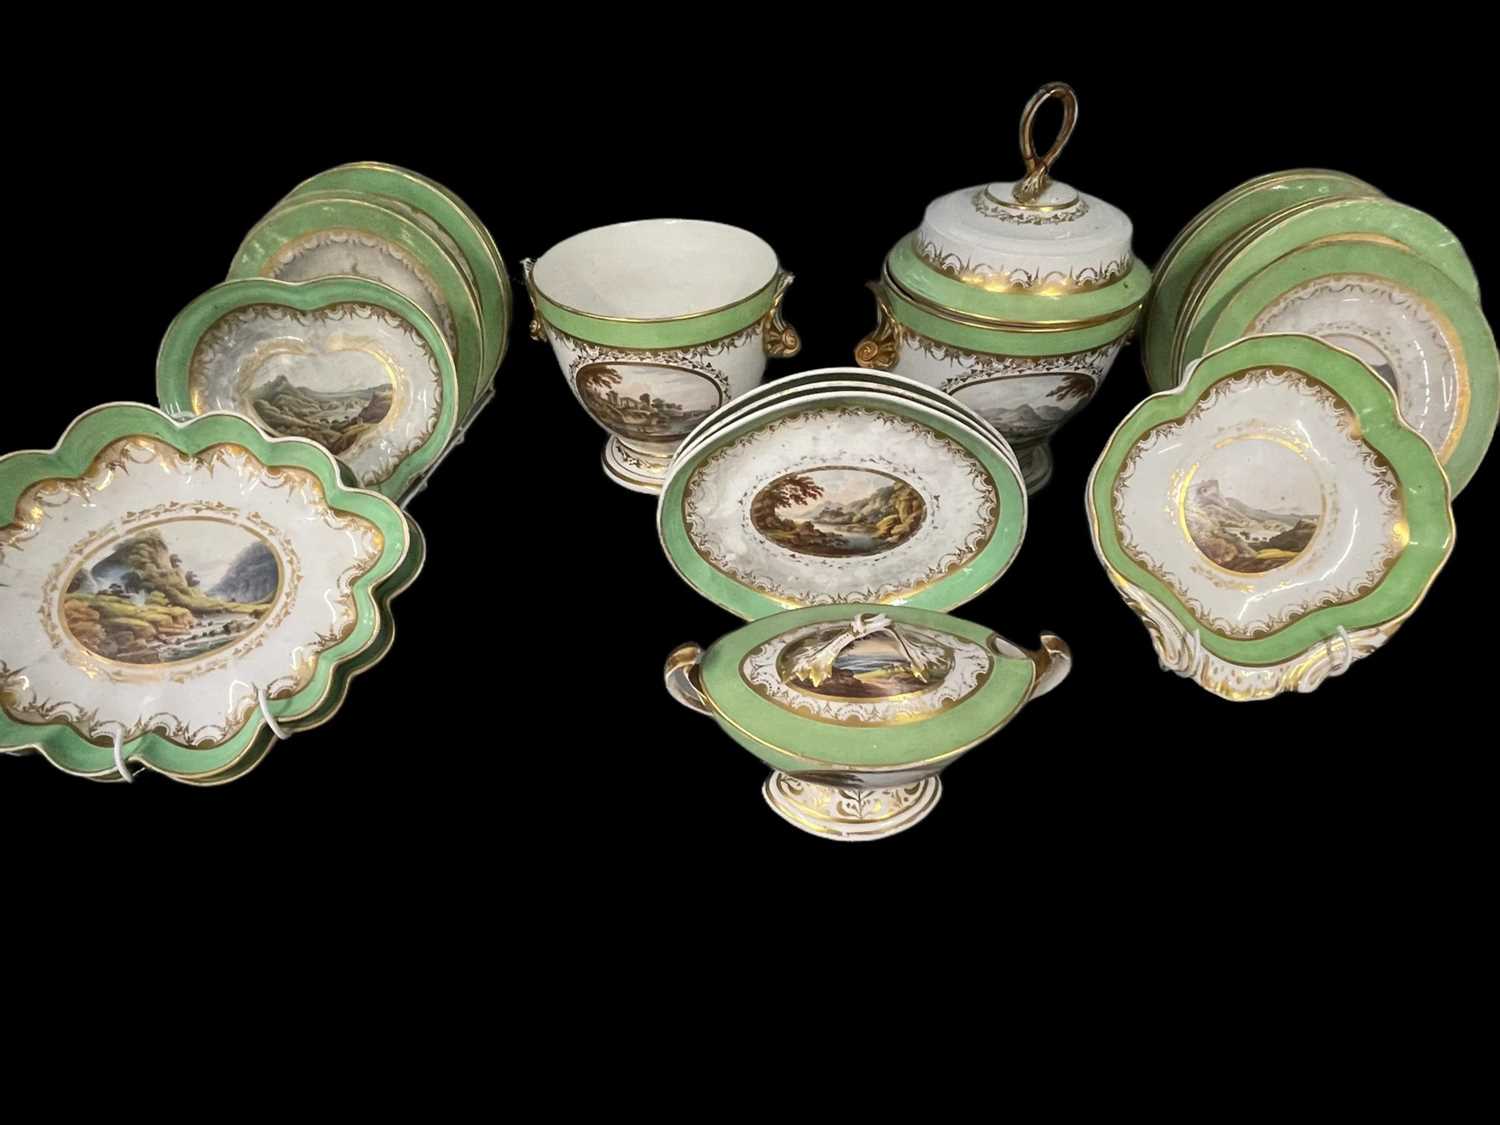 Early 19th cent. Ceramics: